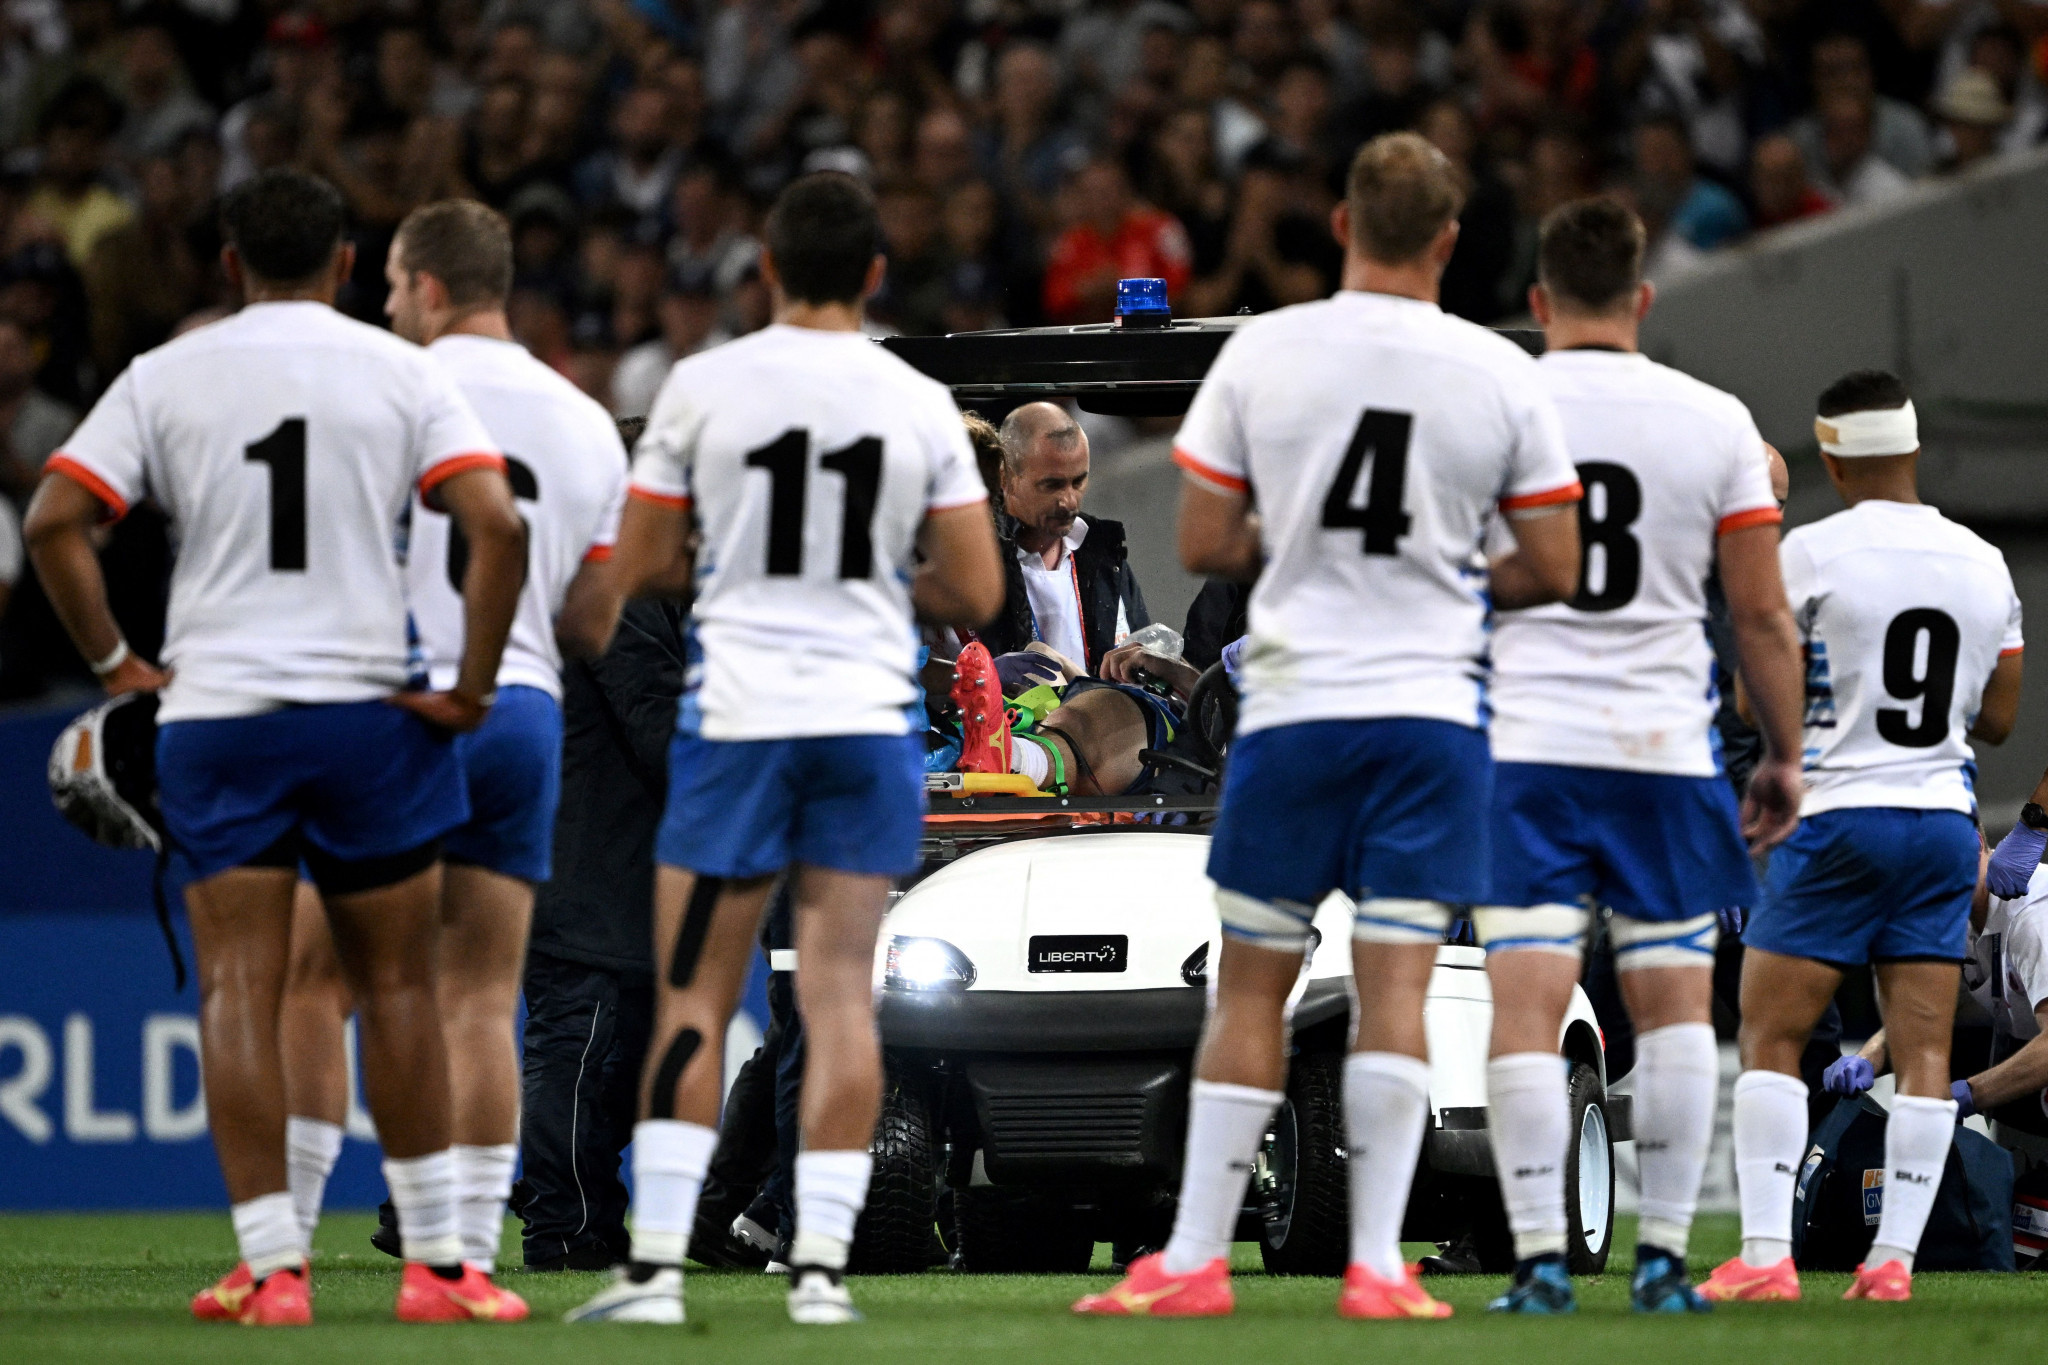 
The match was stopped for around seven minutes as the Roux Malan received treatment before being taken off ©Getty Images